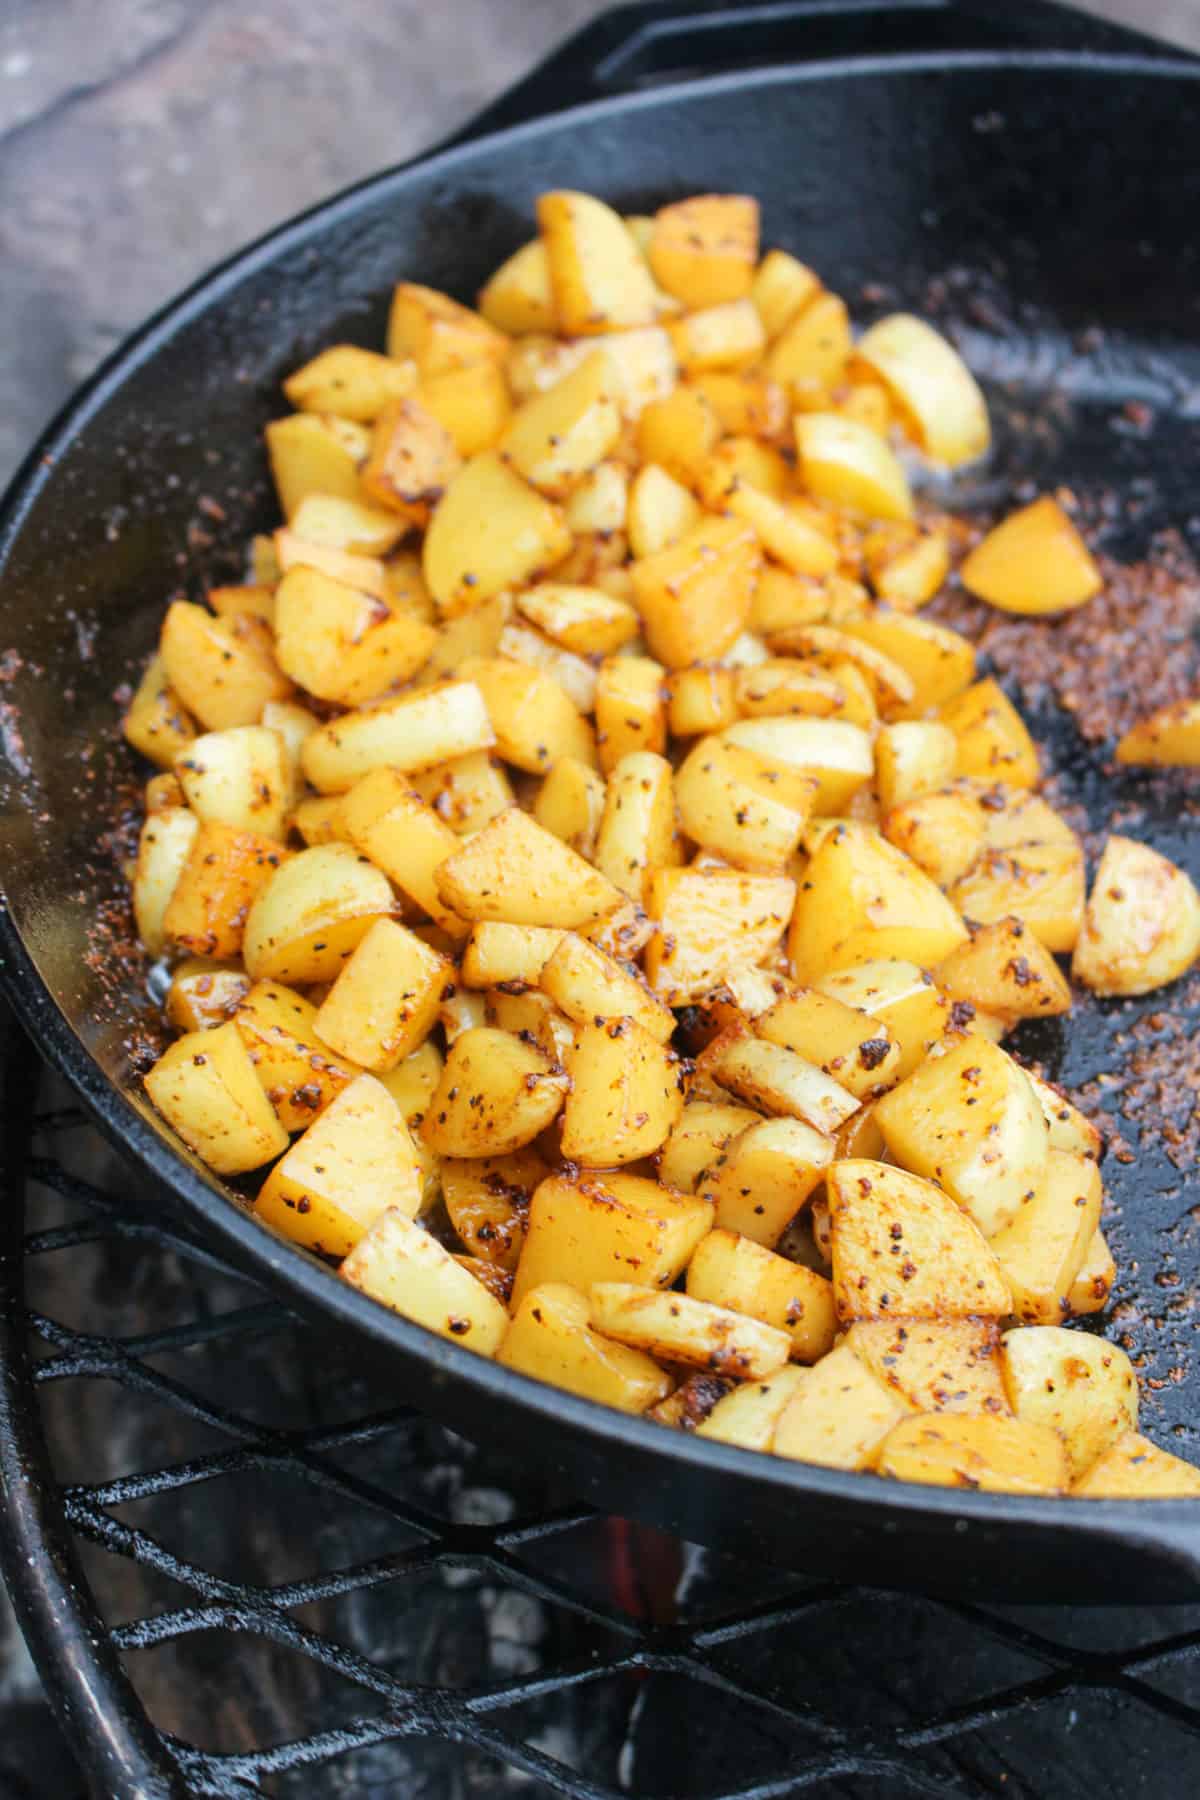 diced, cooked potatoes in a skillet